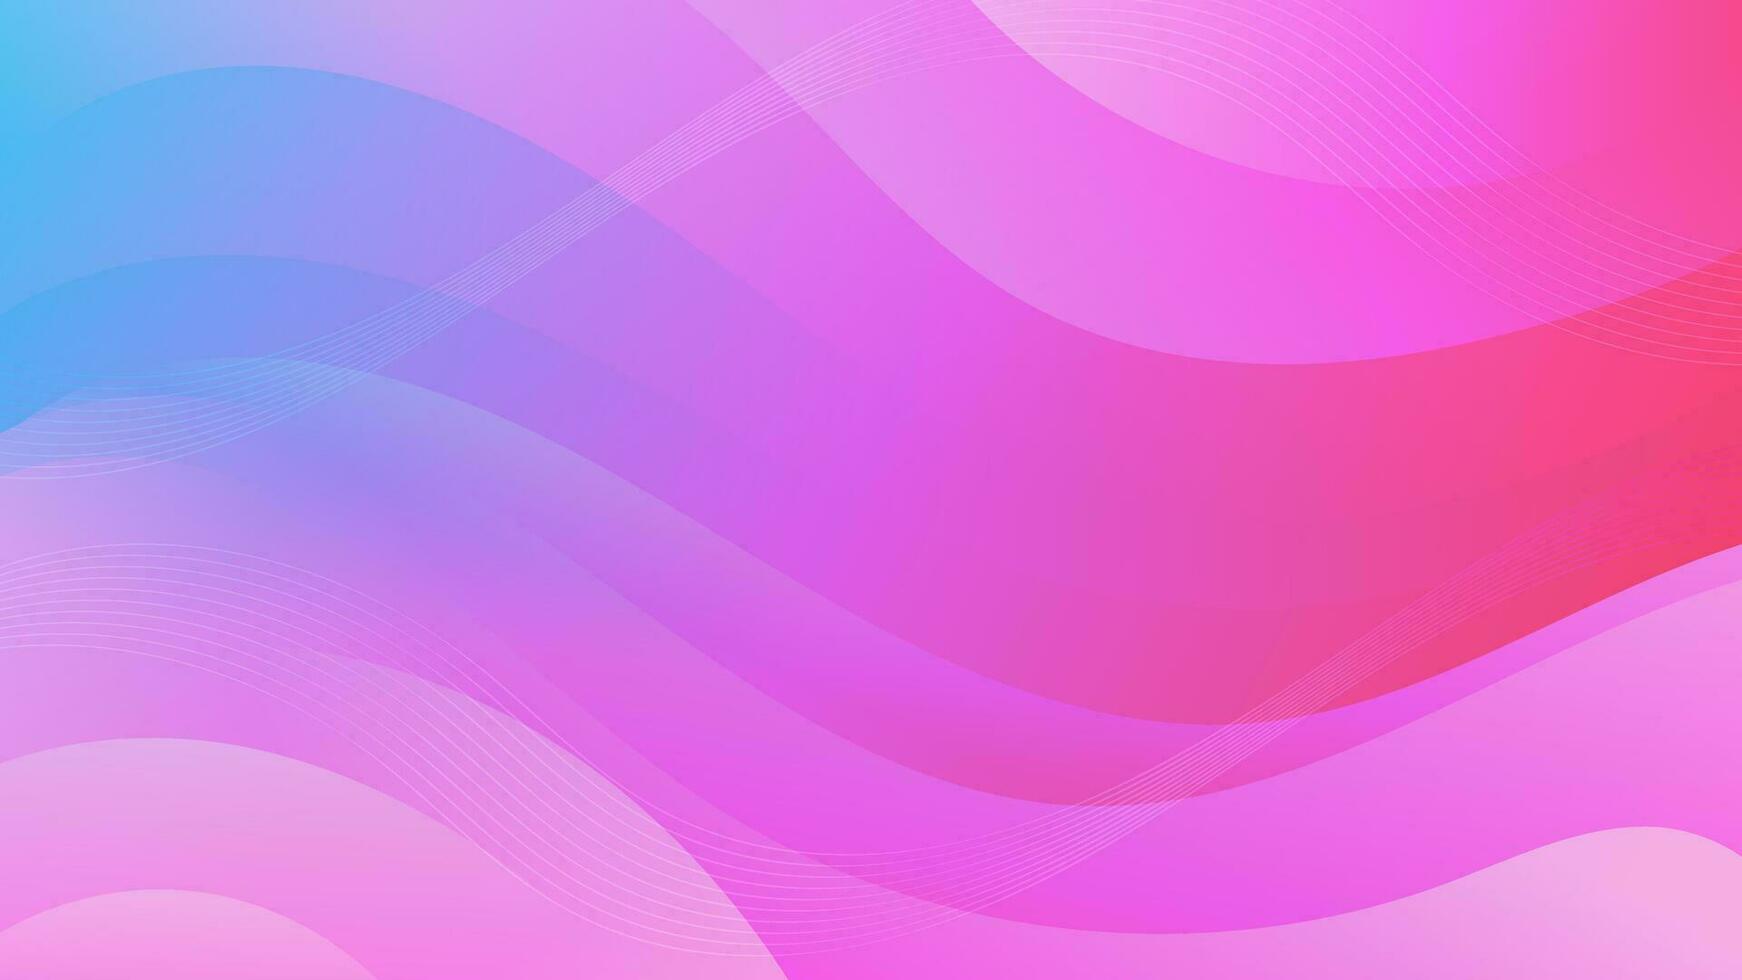 Abstract pink blue Background with Wavy Shapes. flowing and curvy shapes. This asset is suitable for website backgrounds, flyers, posters, and digital art projects. vector